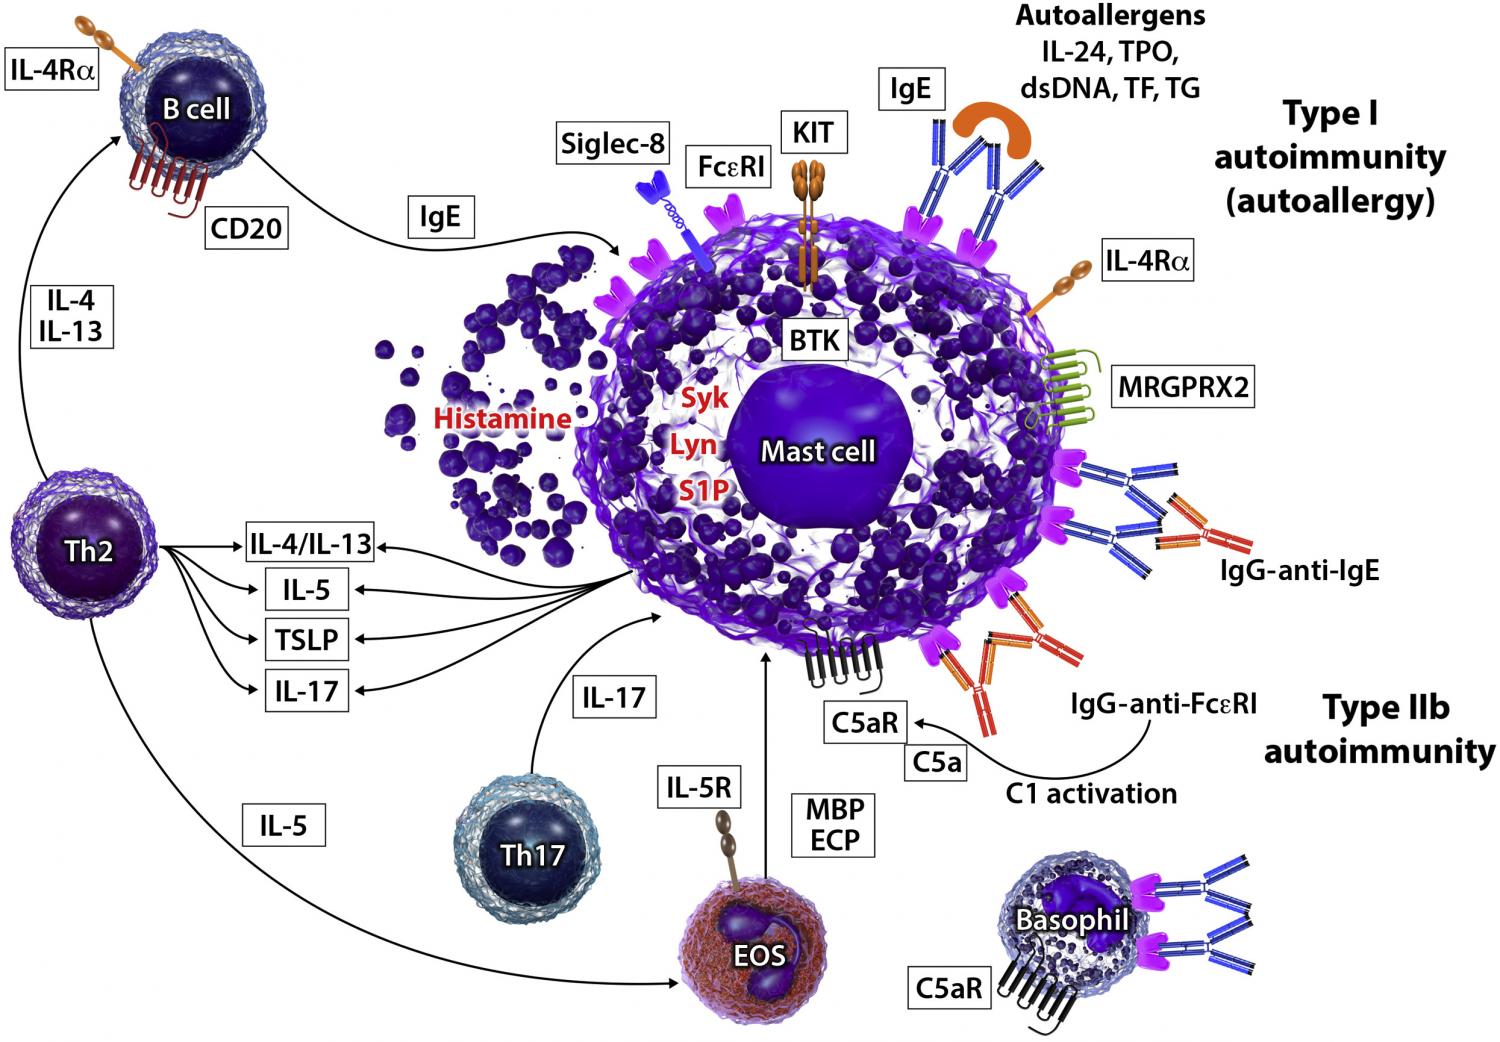 Mast cells are activated by IgE autoantibodies to autoallergens (type I autoallergy) or IgG-anti-IgE/IgG-anti-FcεRI autoantibodies (type IIb autoimmunity).